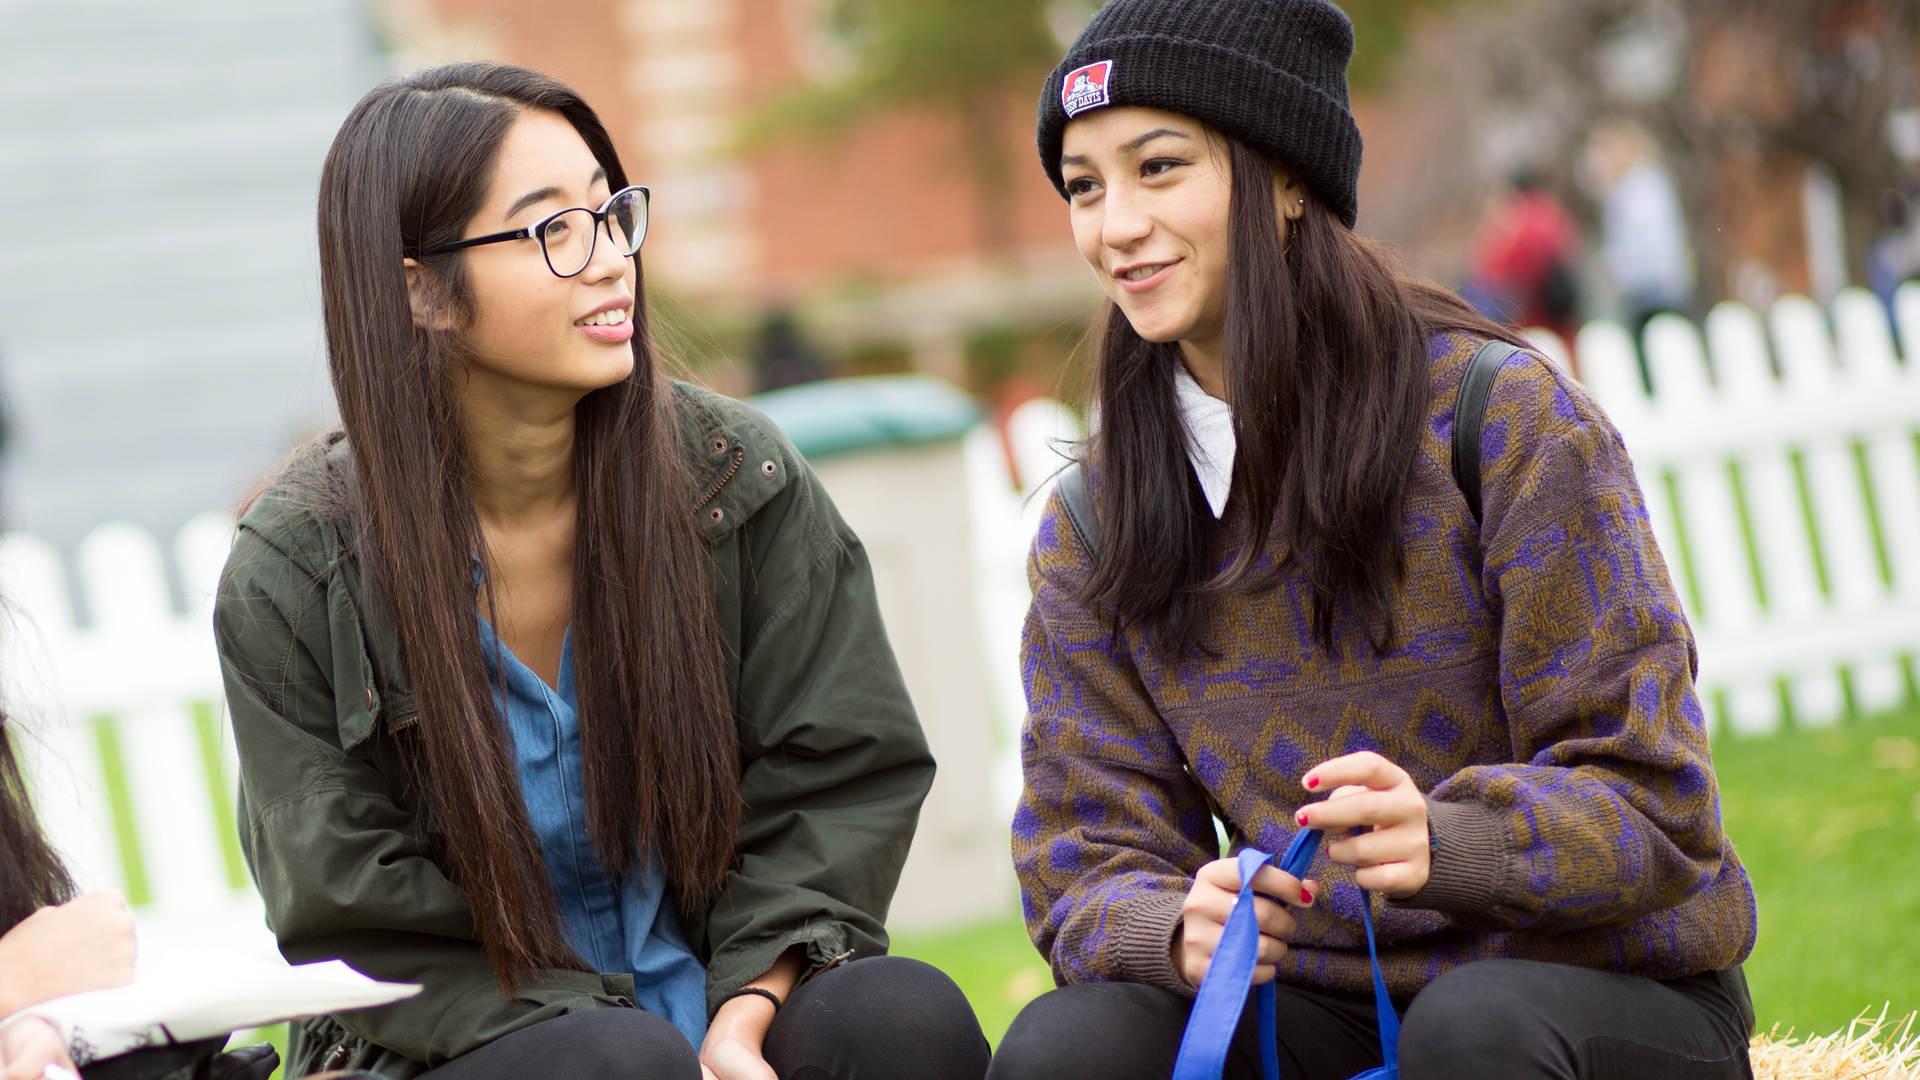 Two students having a conversation outside